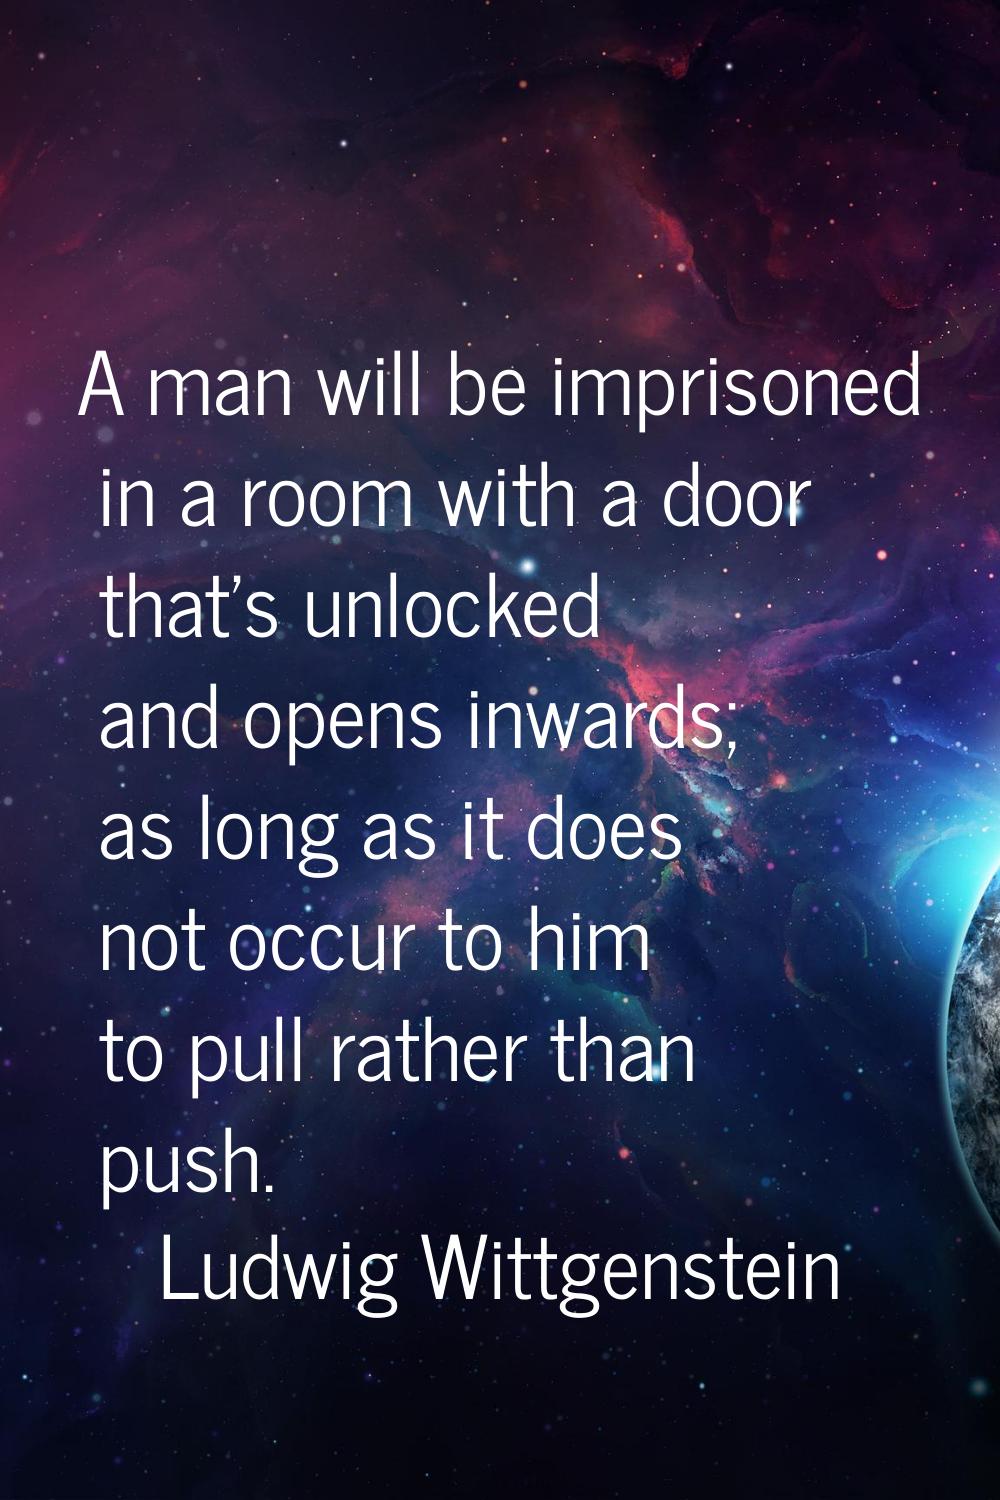 A man will be imprisoned in a room with a door that's unlocked and opens inwards; as long as it doe